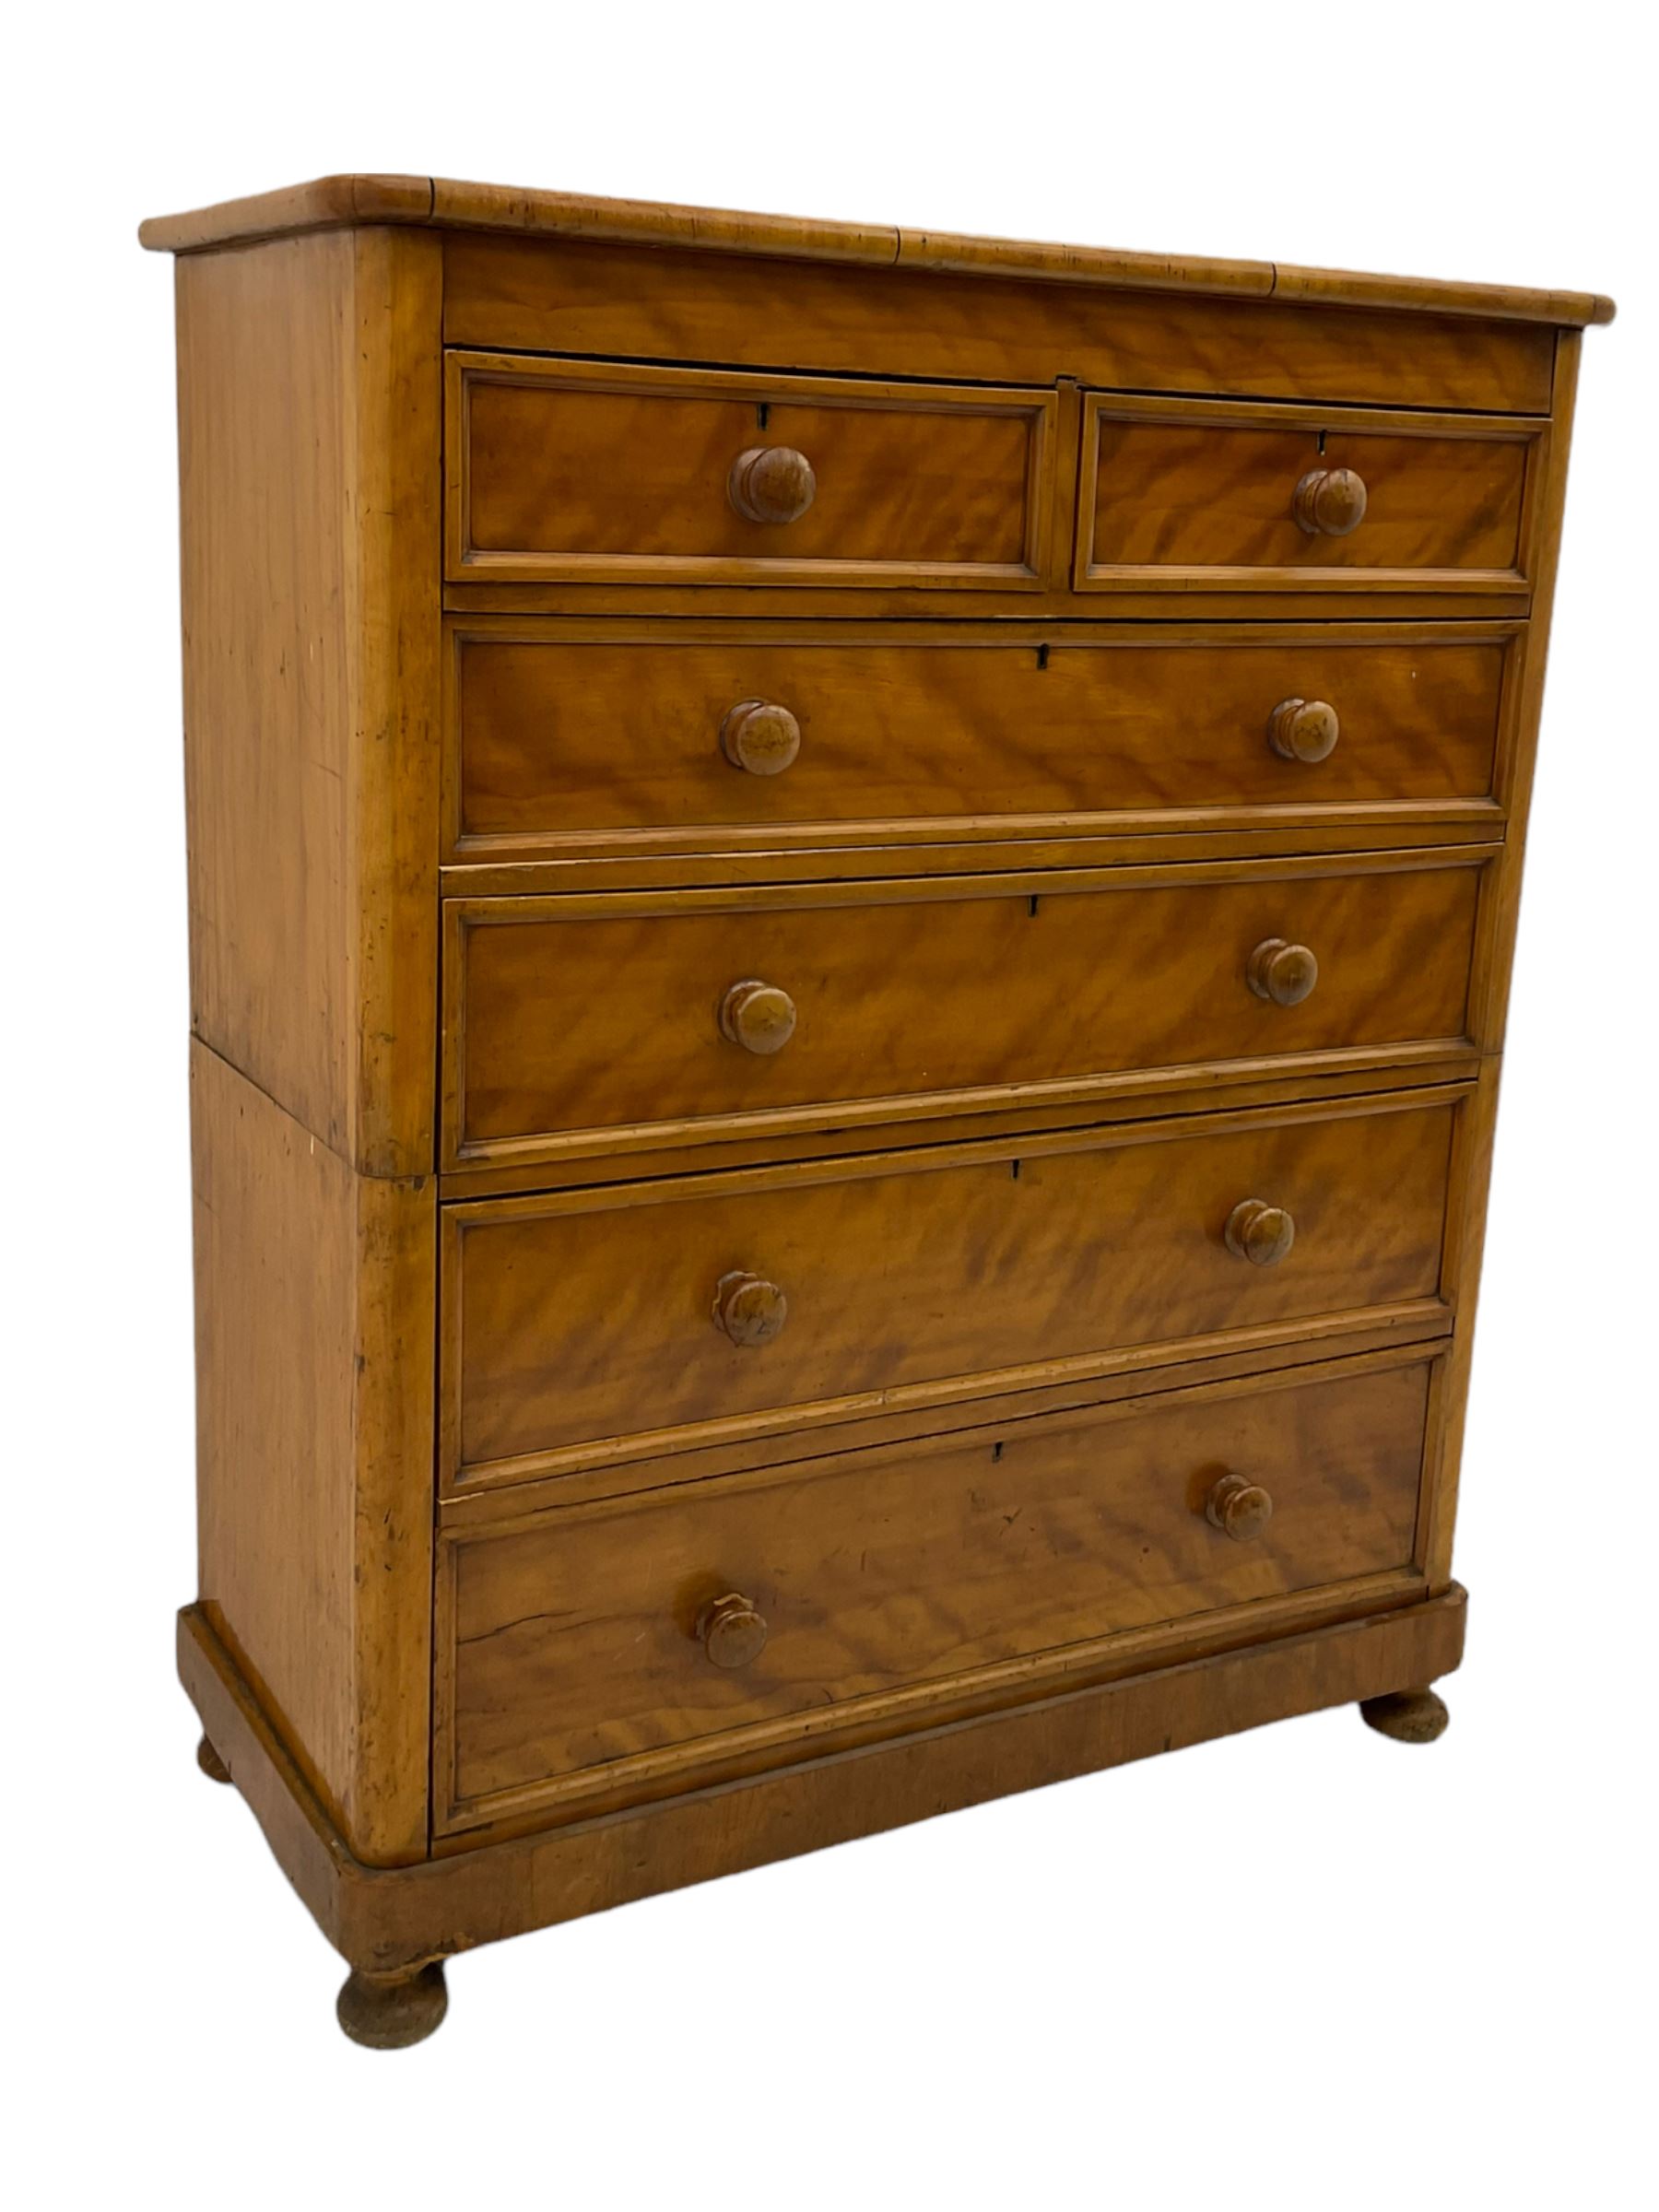 Victorian satinwood chest - Image 4 of 8